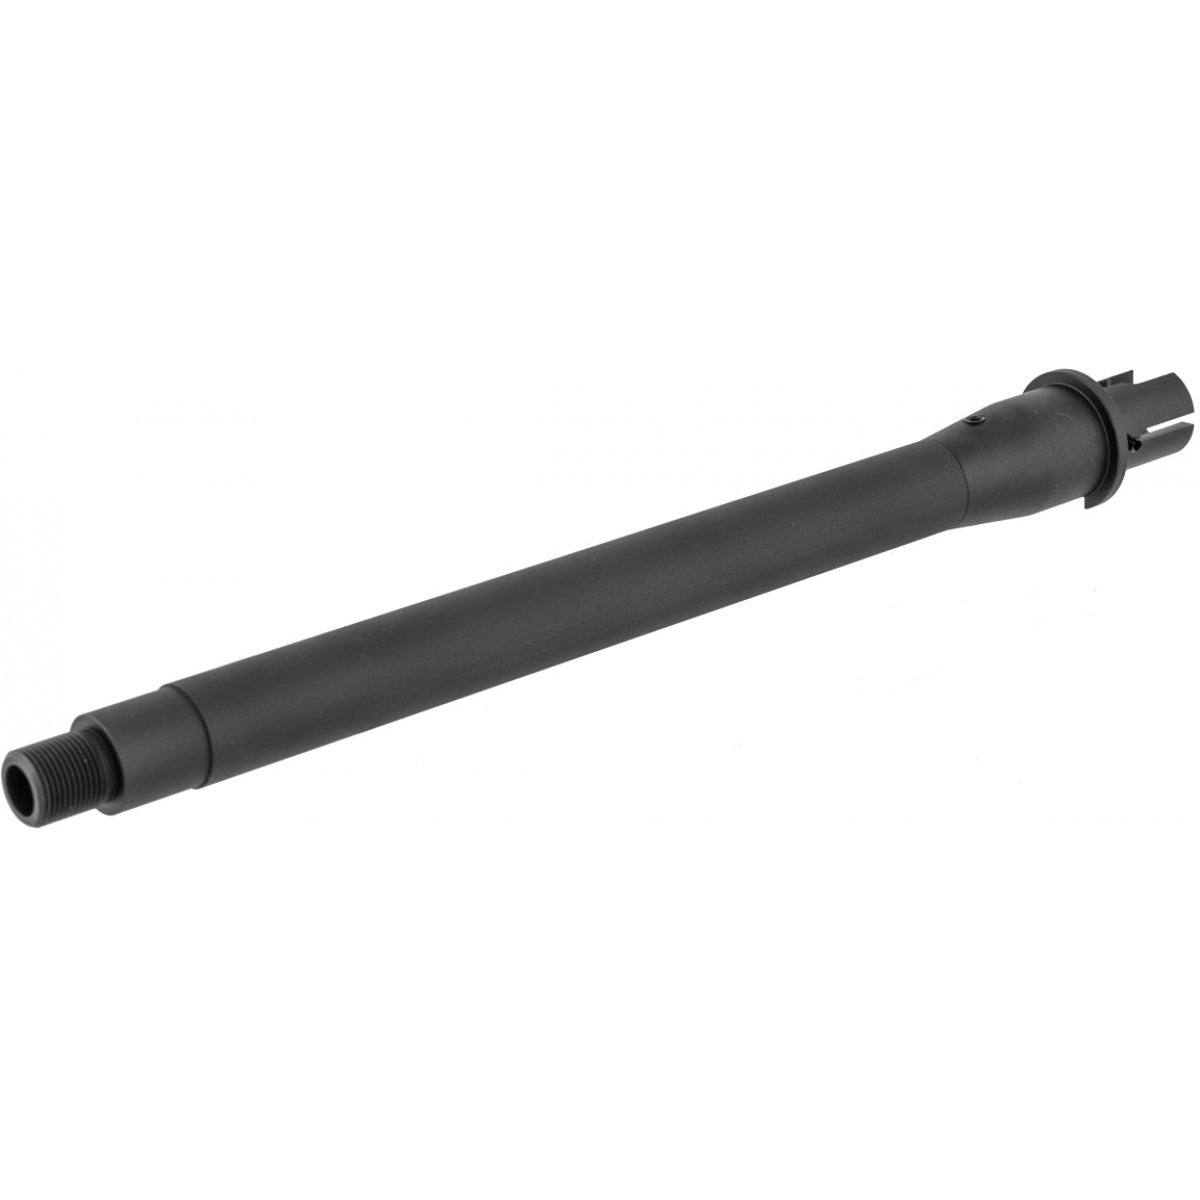 Krytac Trident M4 CRB 10.5" One Piece Outer Barrel Assembly for M4 / M16 Series Airsoft AEG Rifles - Eminent Paintball And Airsoft